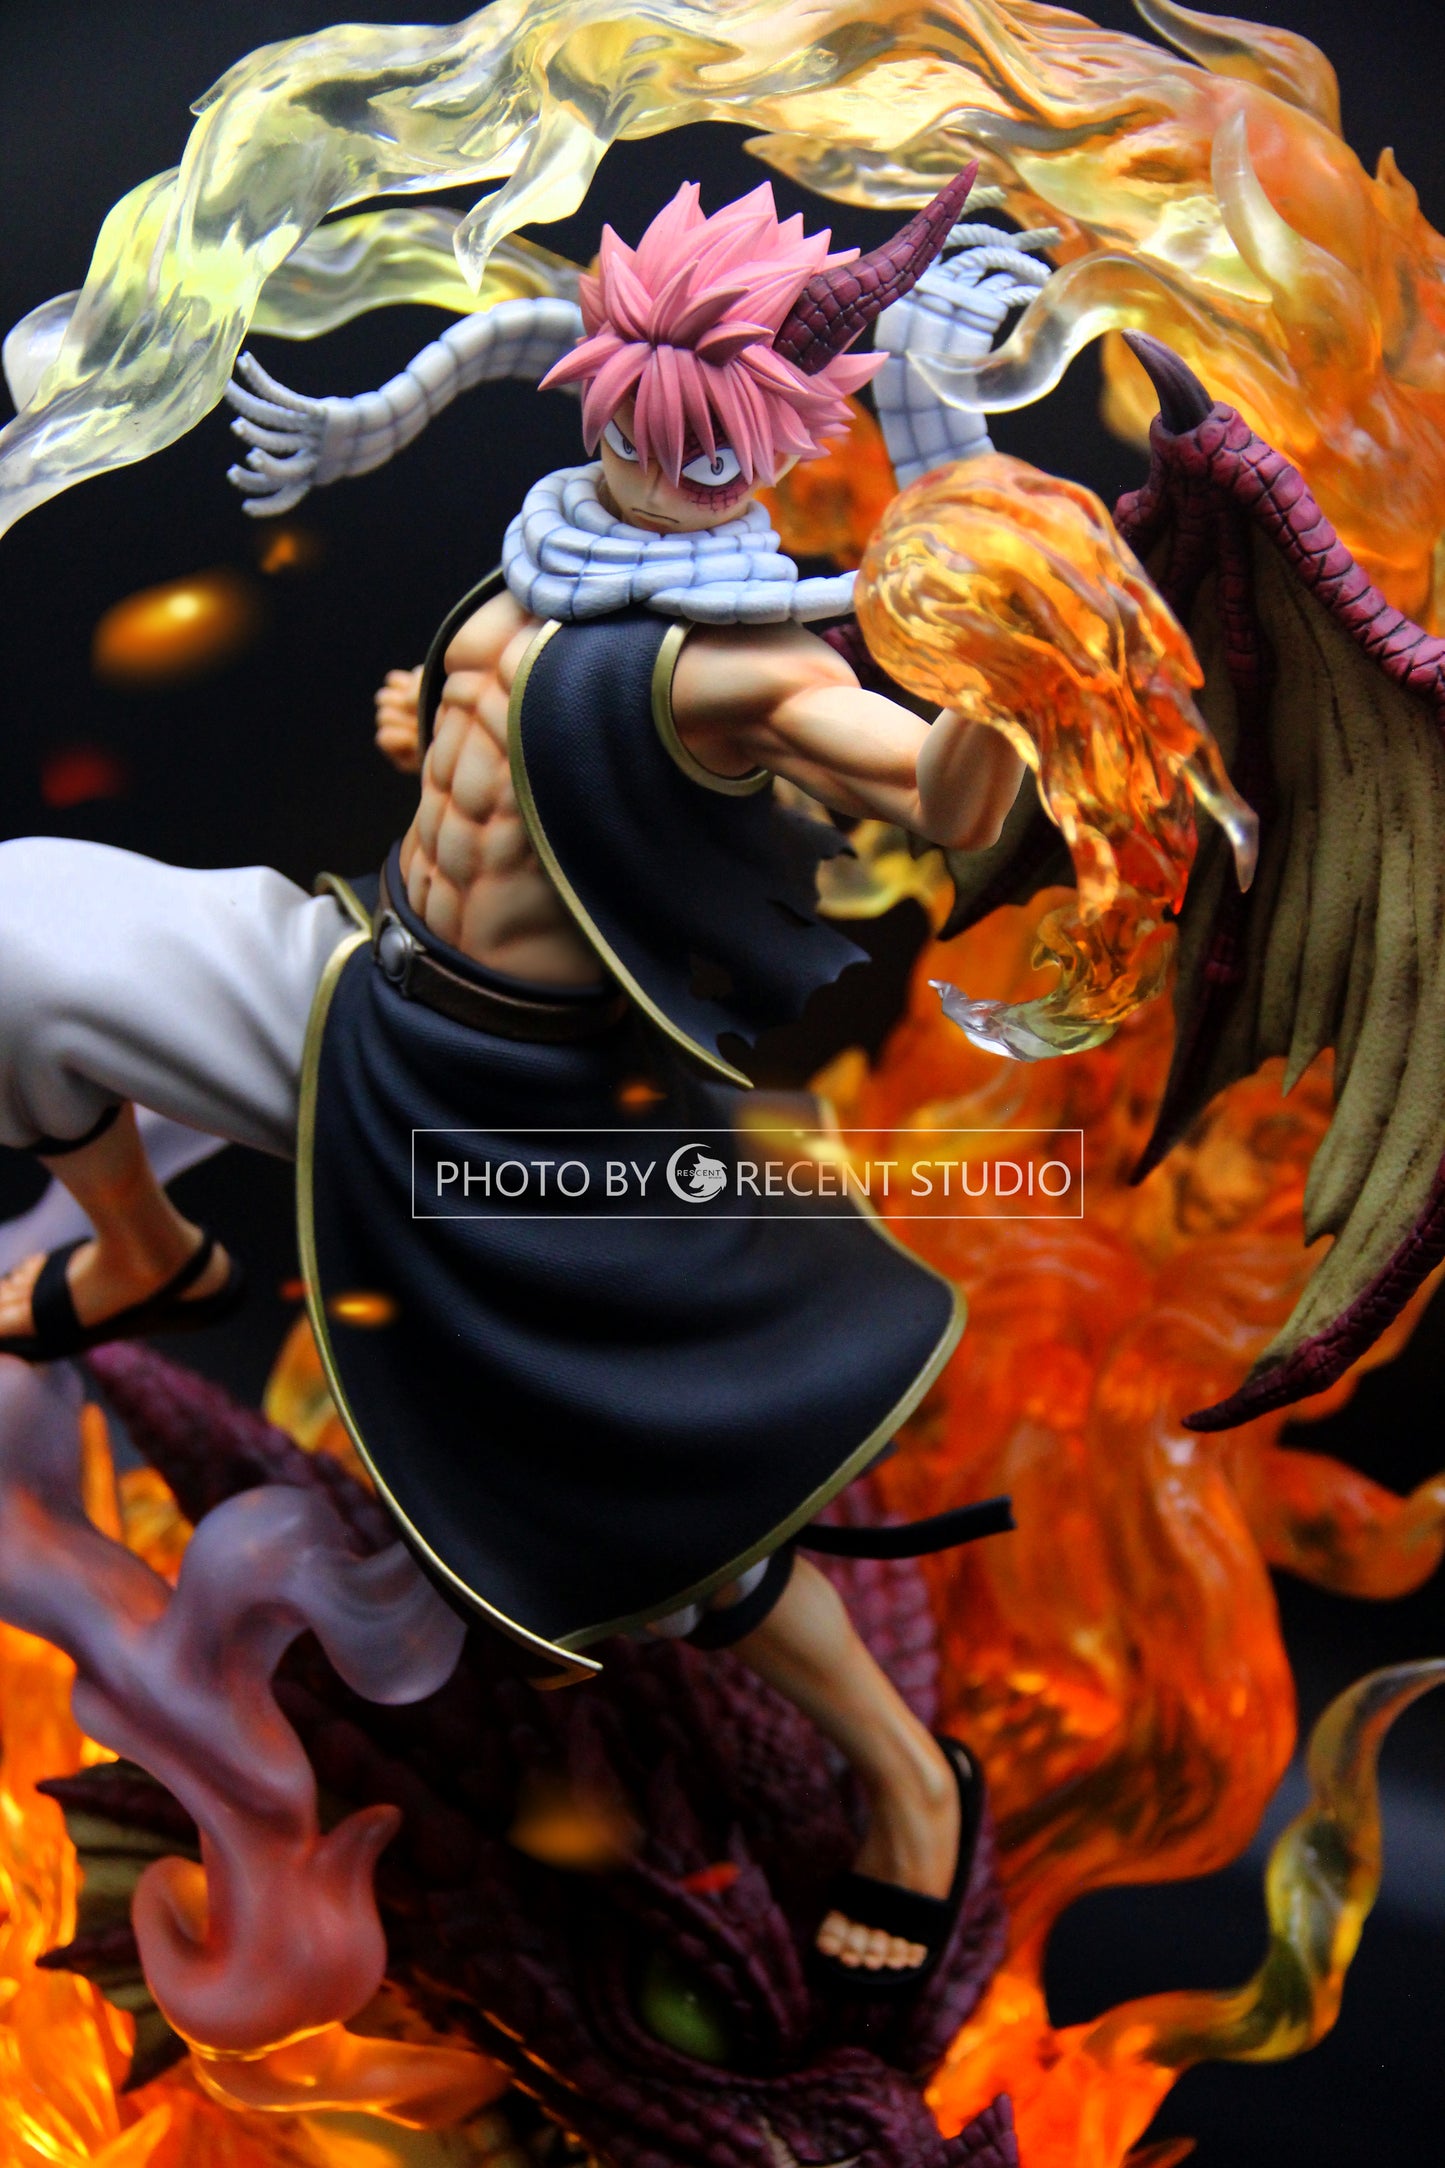 CRESCENT STUDIO – FAIRY TAIL: FIRE DRAGON SLAYER NATSU DRAGNEEL 1/6 [SOLD OUT]